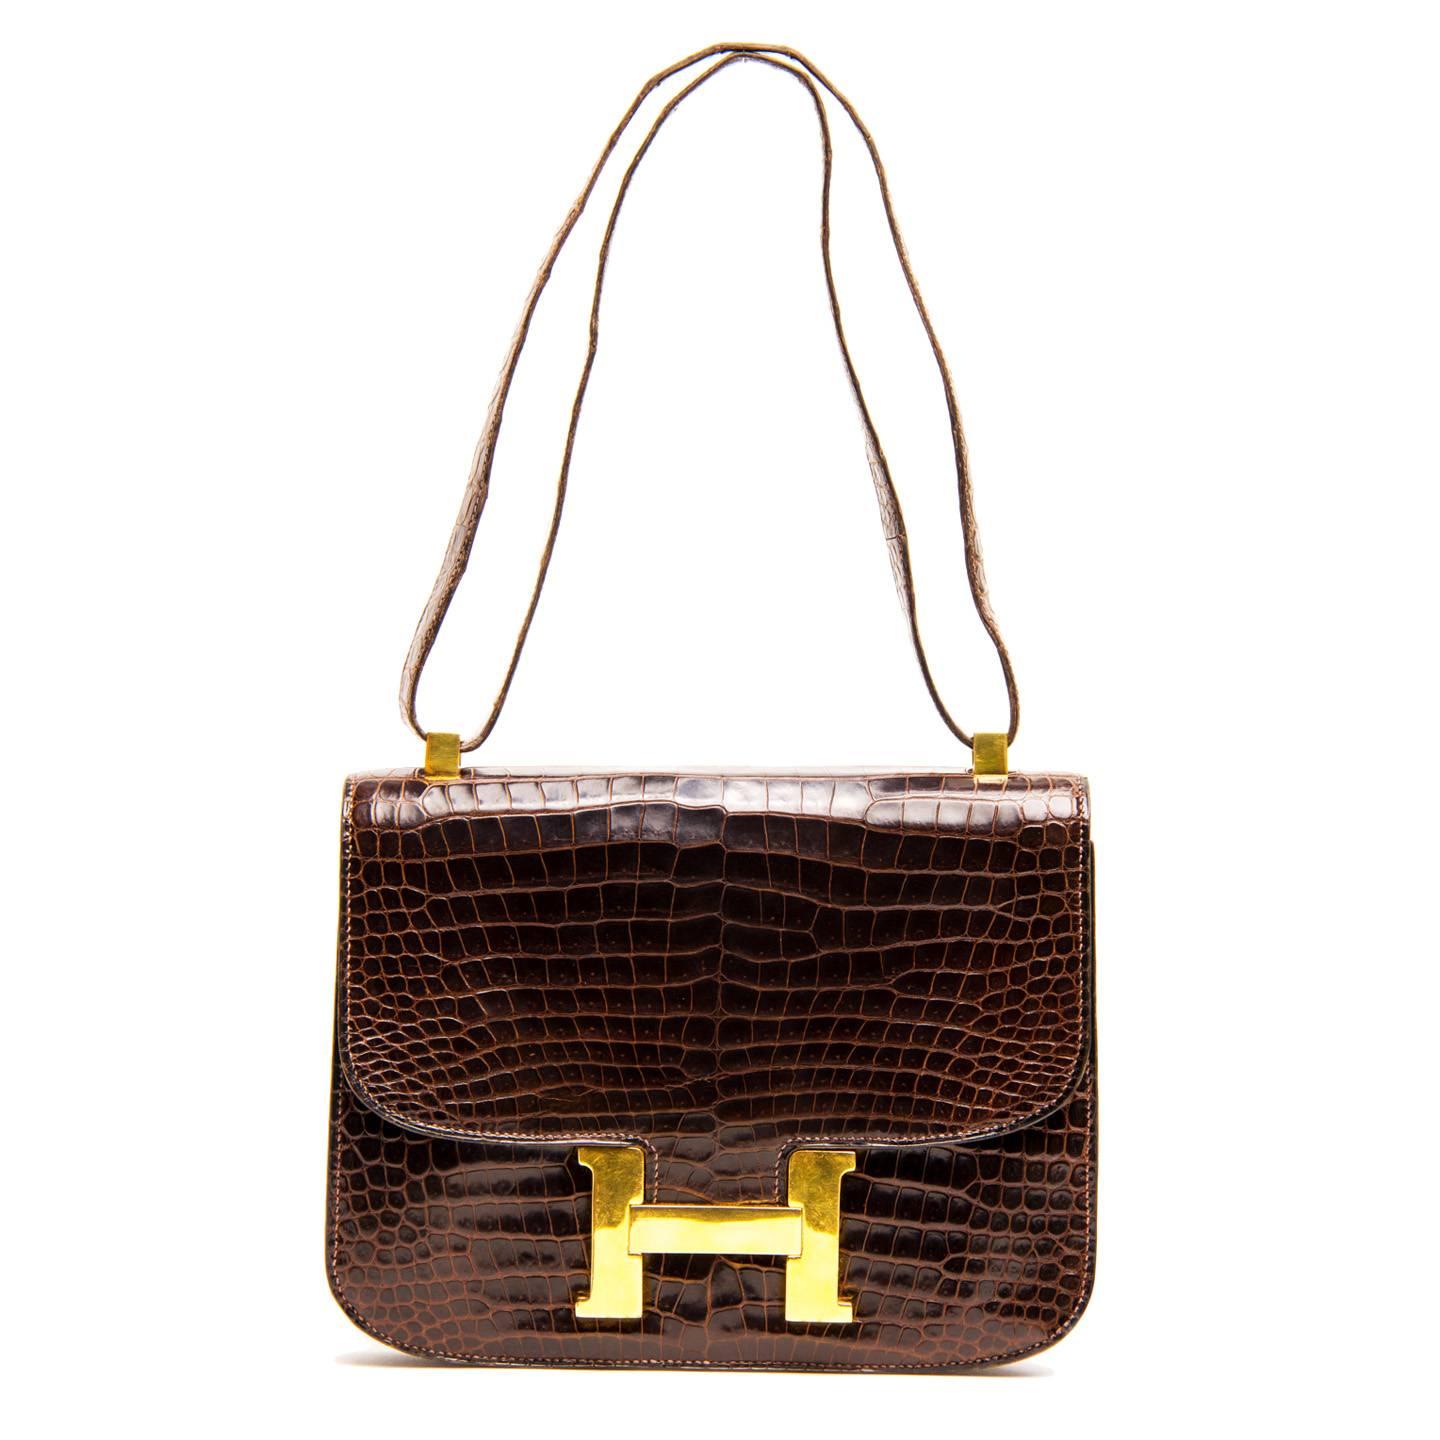 Brown crocodile Constance 23cm bag with gold hardware. This vintage Hermès style has tonal stitching, a beautiful crocodile skin, a metal 